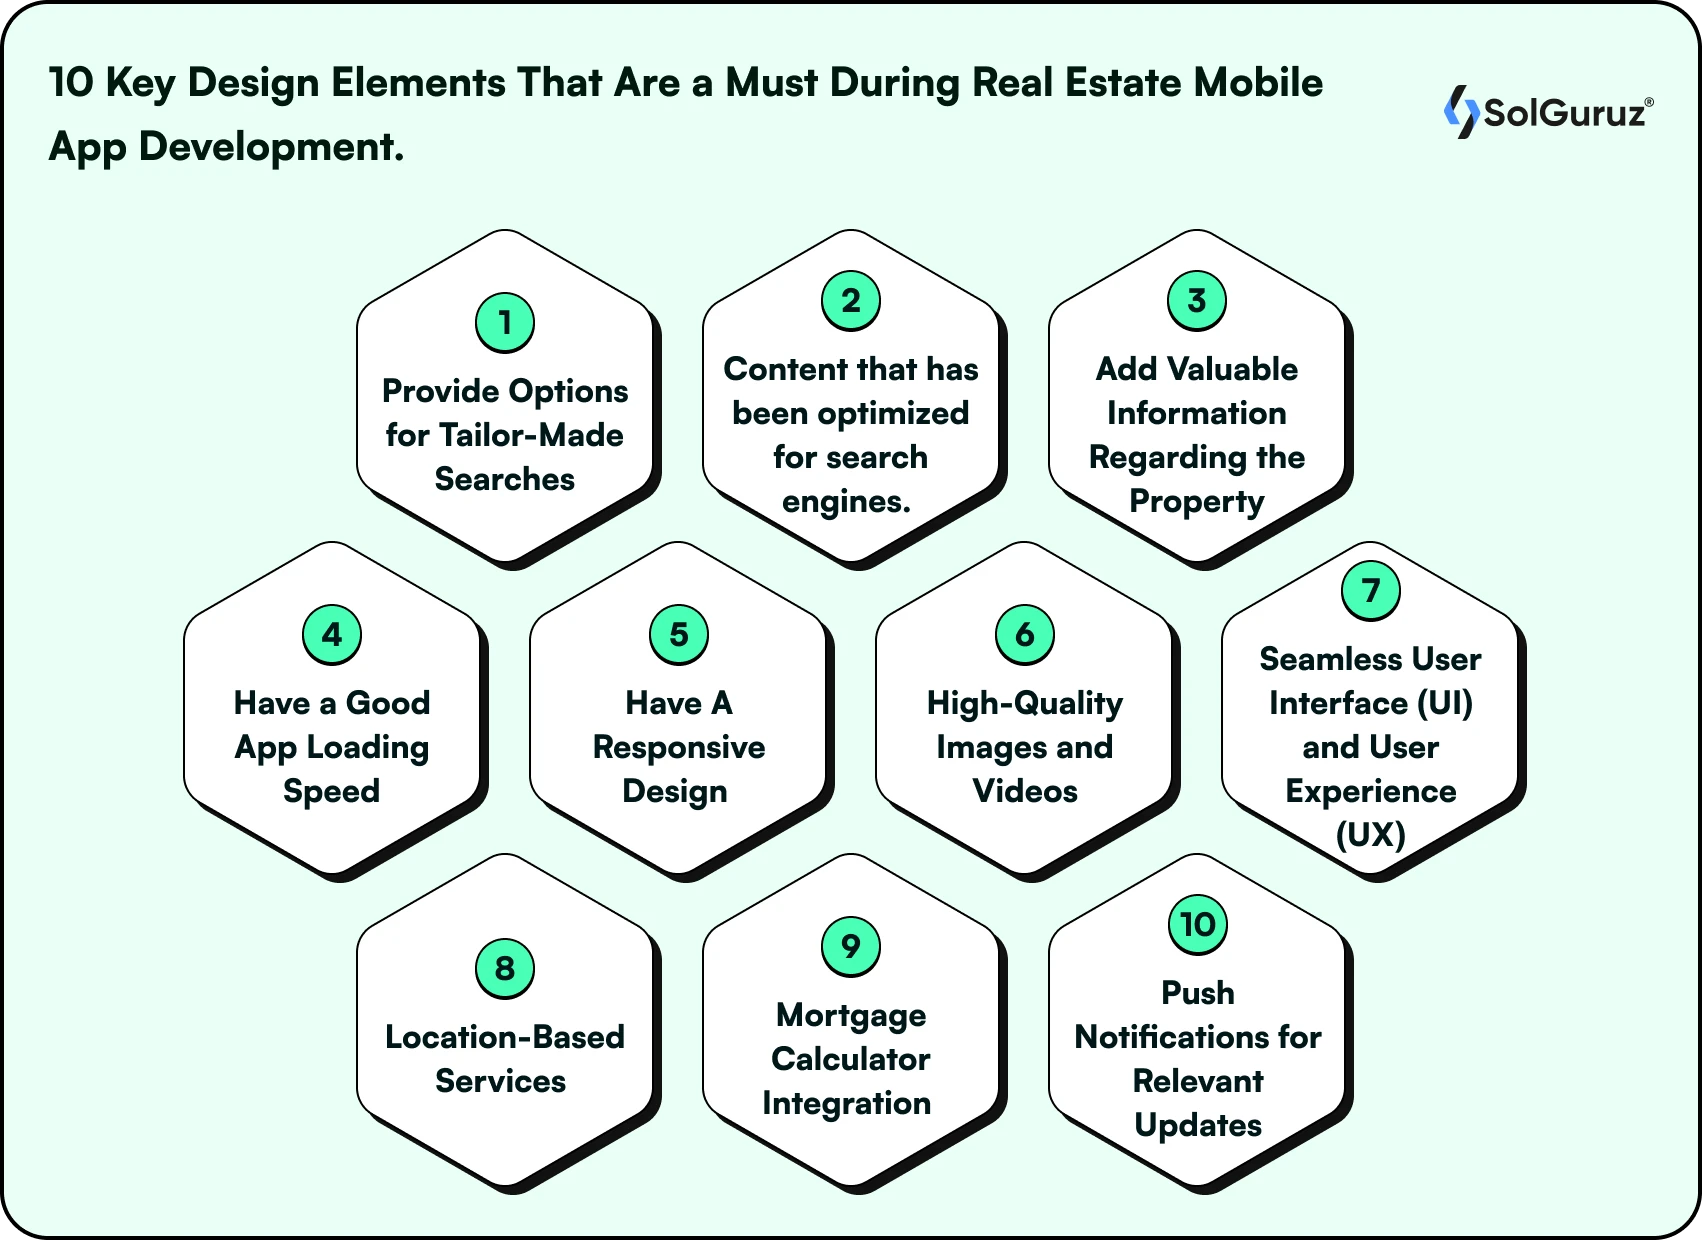 Key Design Elements That Are a Must During Real Estate Mobile App Development